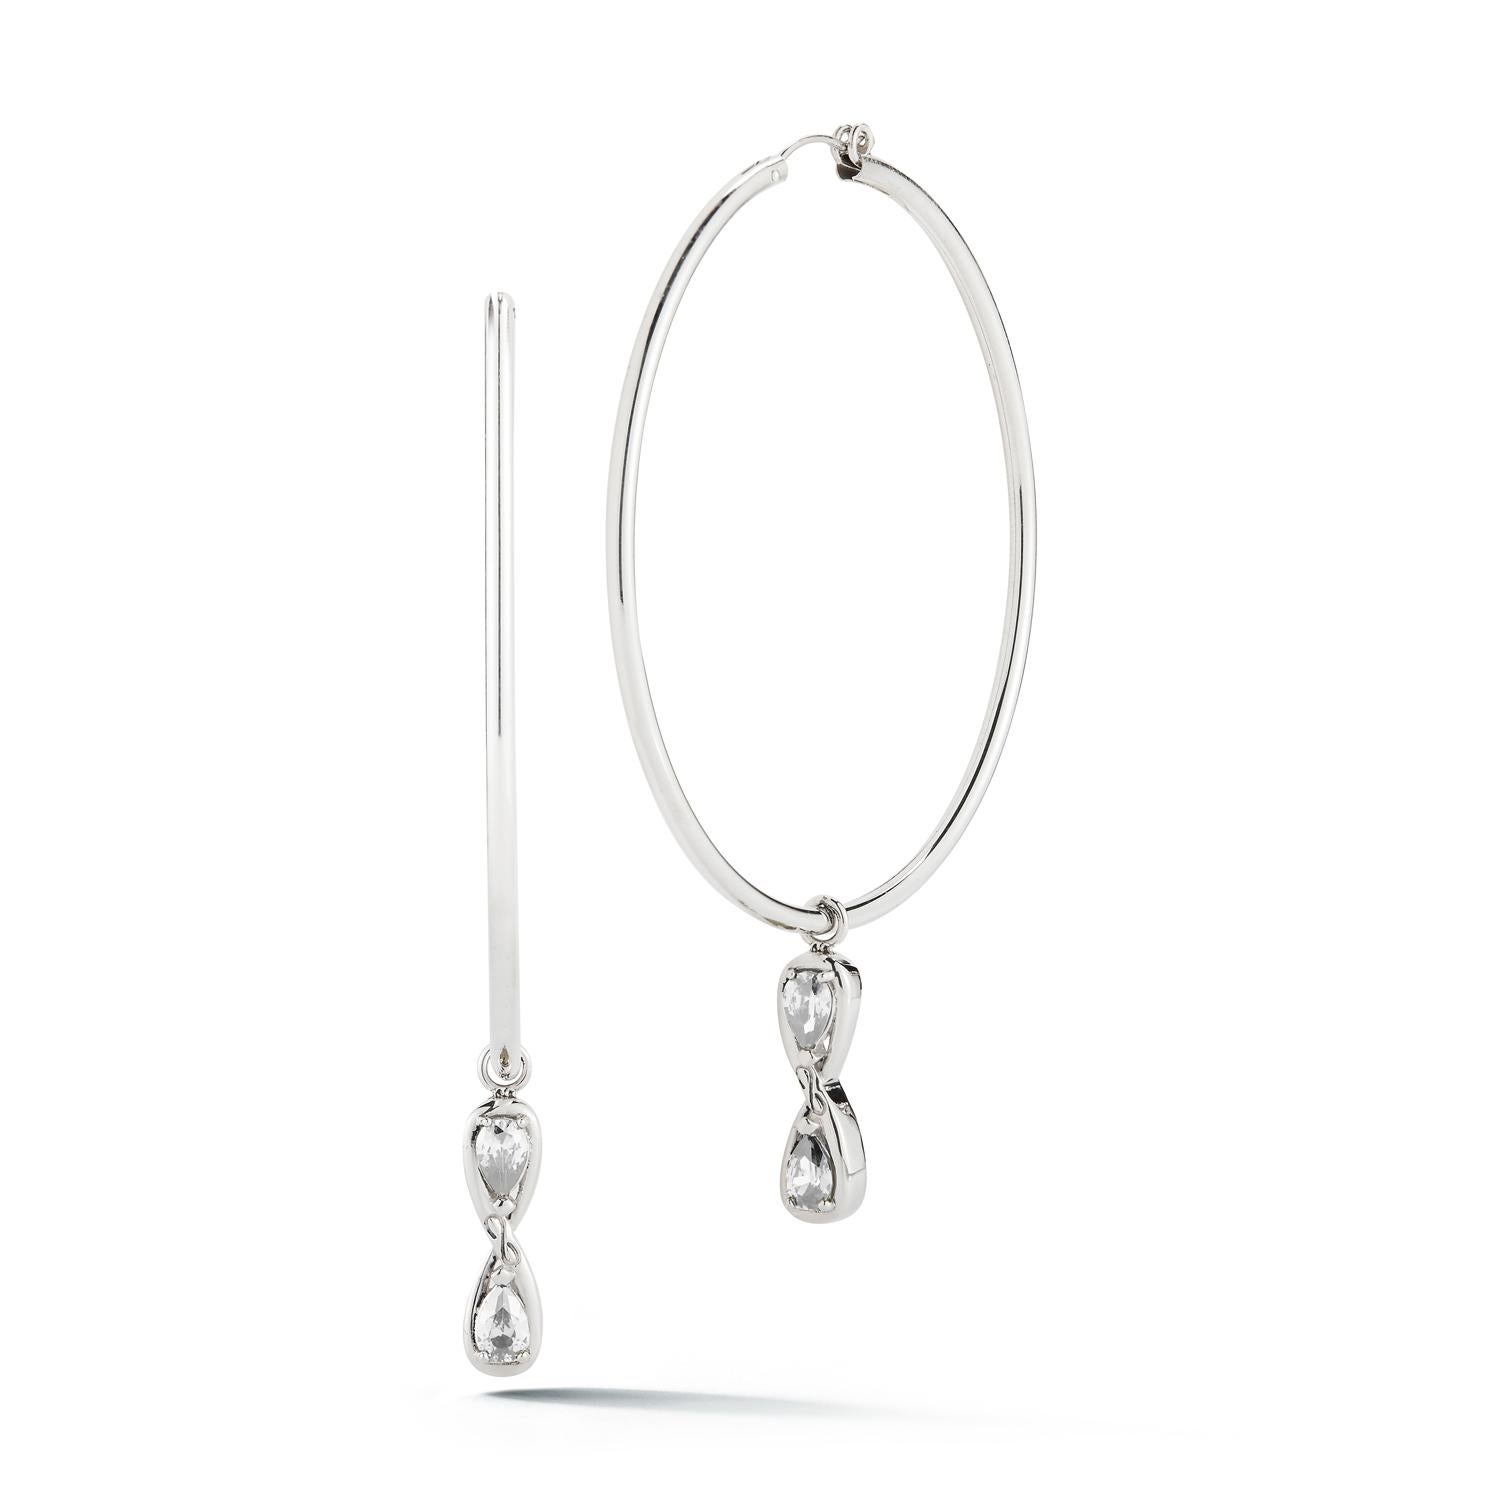 Designed in NYC

.925 Sterling Silver 6 x 4 mm Black Sapphire Infinity Stone Dangle Hoops. When it comes to self-expression, the style possibilities are endless. Infinity stone dangle hoops:

Sterling silver 
High-polish finish
Light-weight 
Light